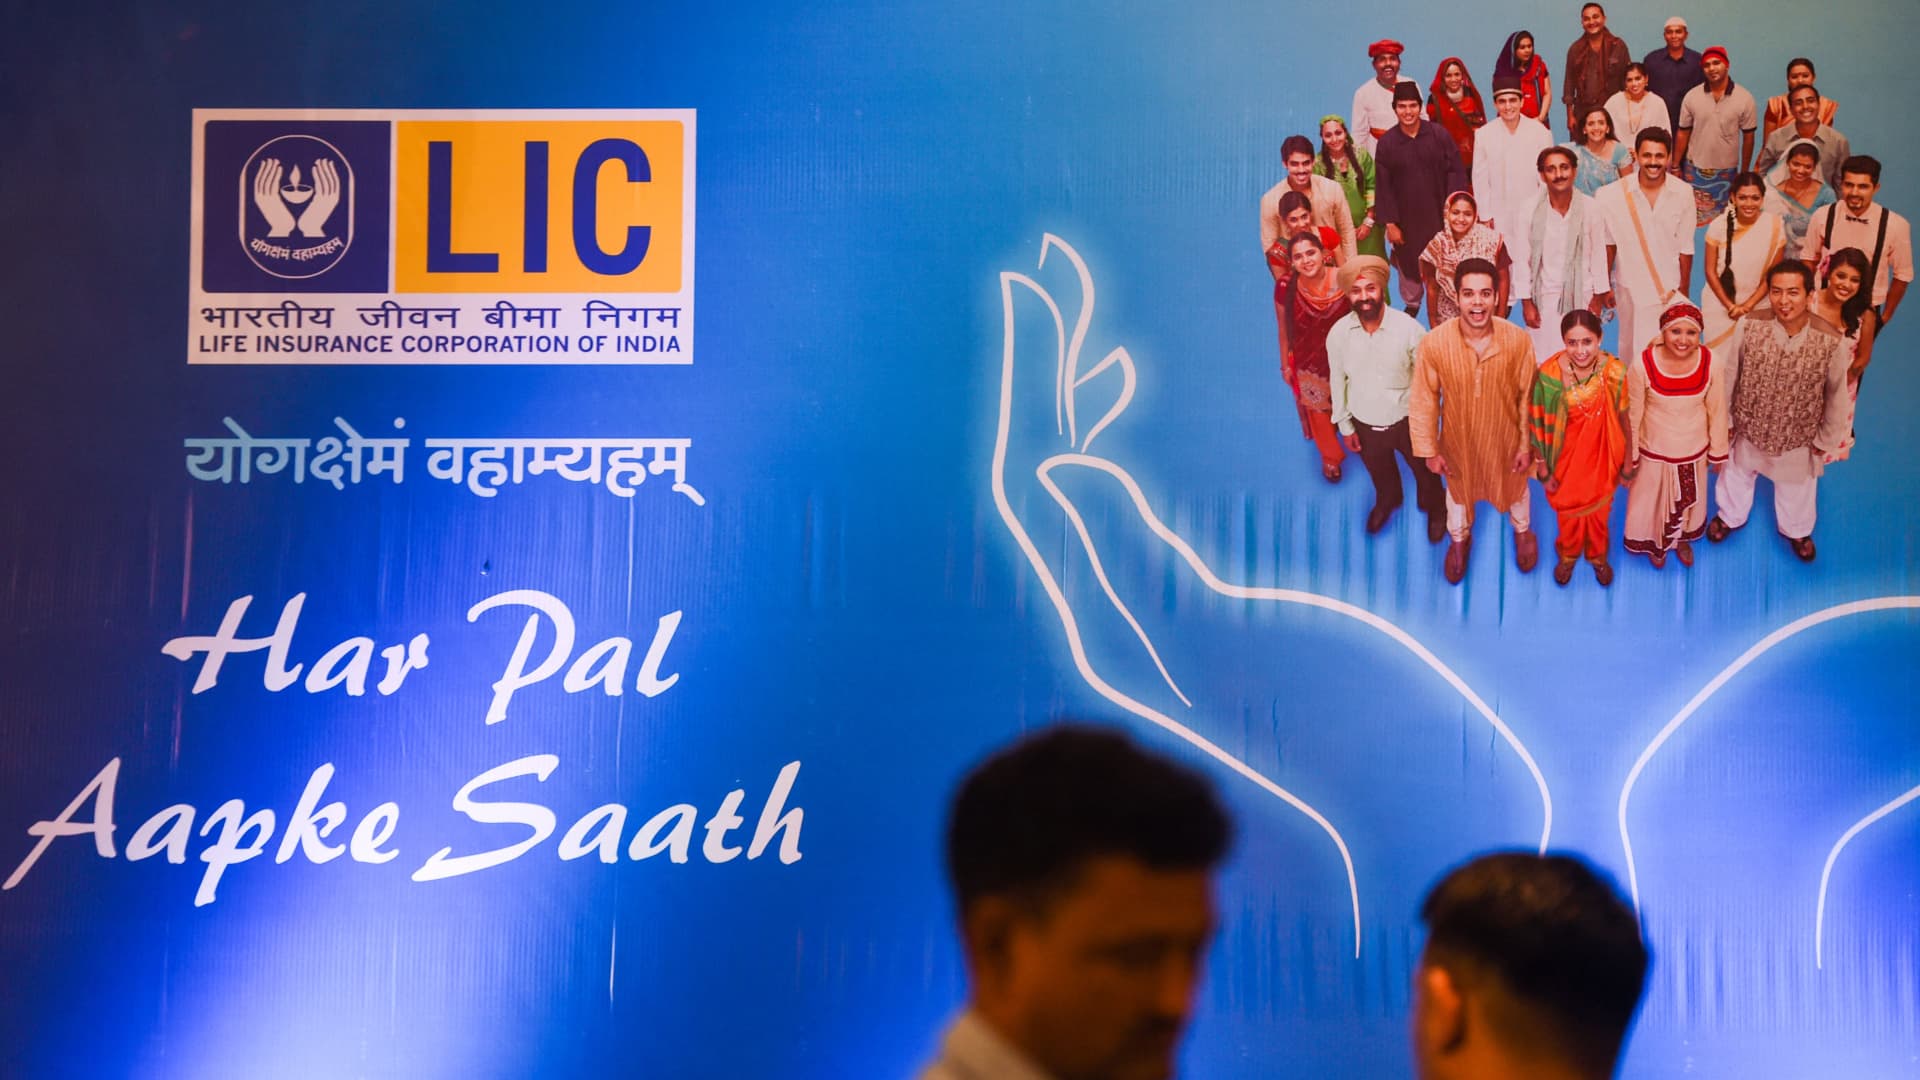 LIC, India’s largest IPO ever, will test the appetite of foreign investors